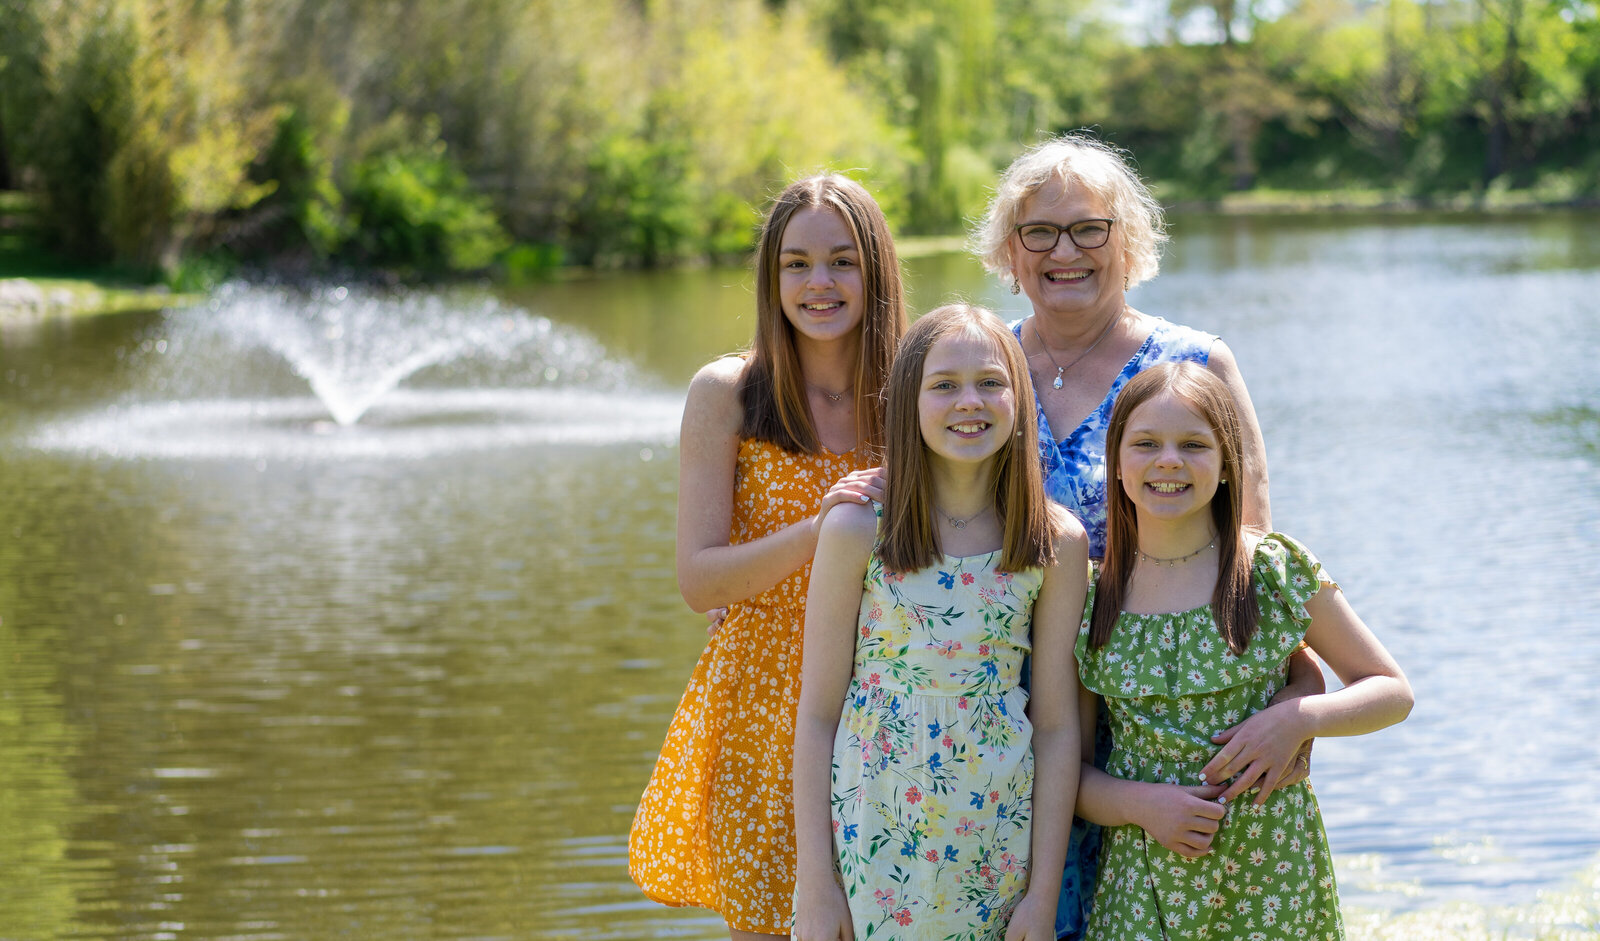 Peg Gries poses with her three grandkids in front of a fountain at Schedel Gardens in Elmore, Ohio.